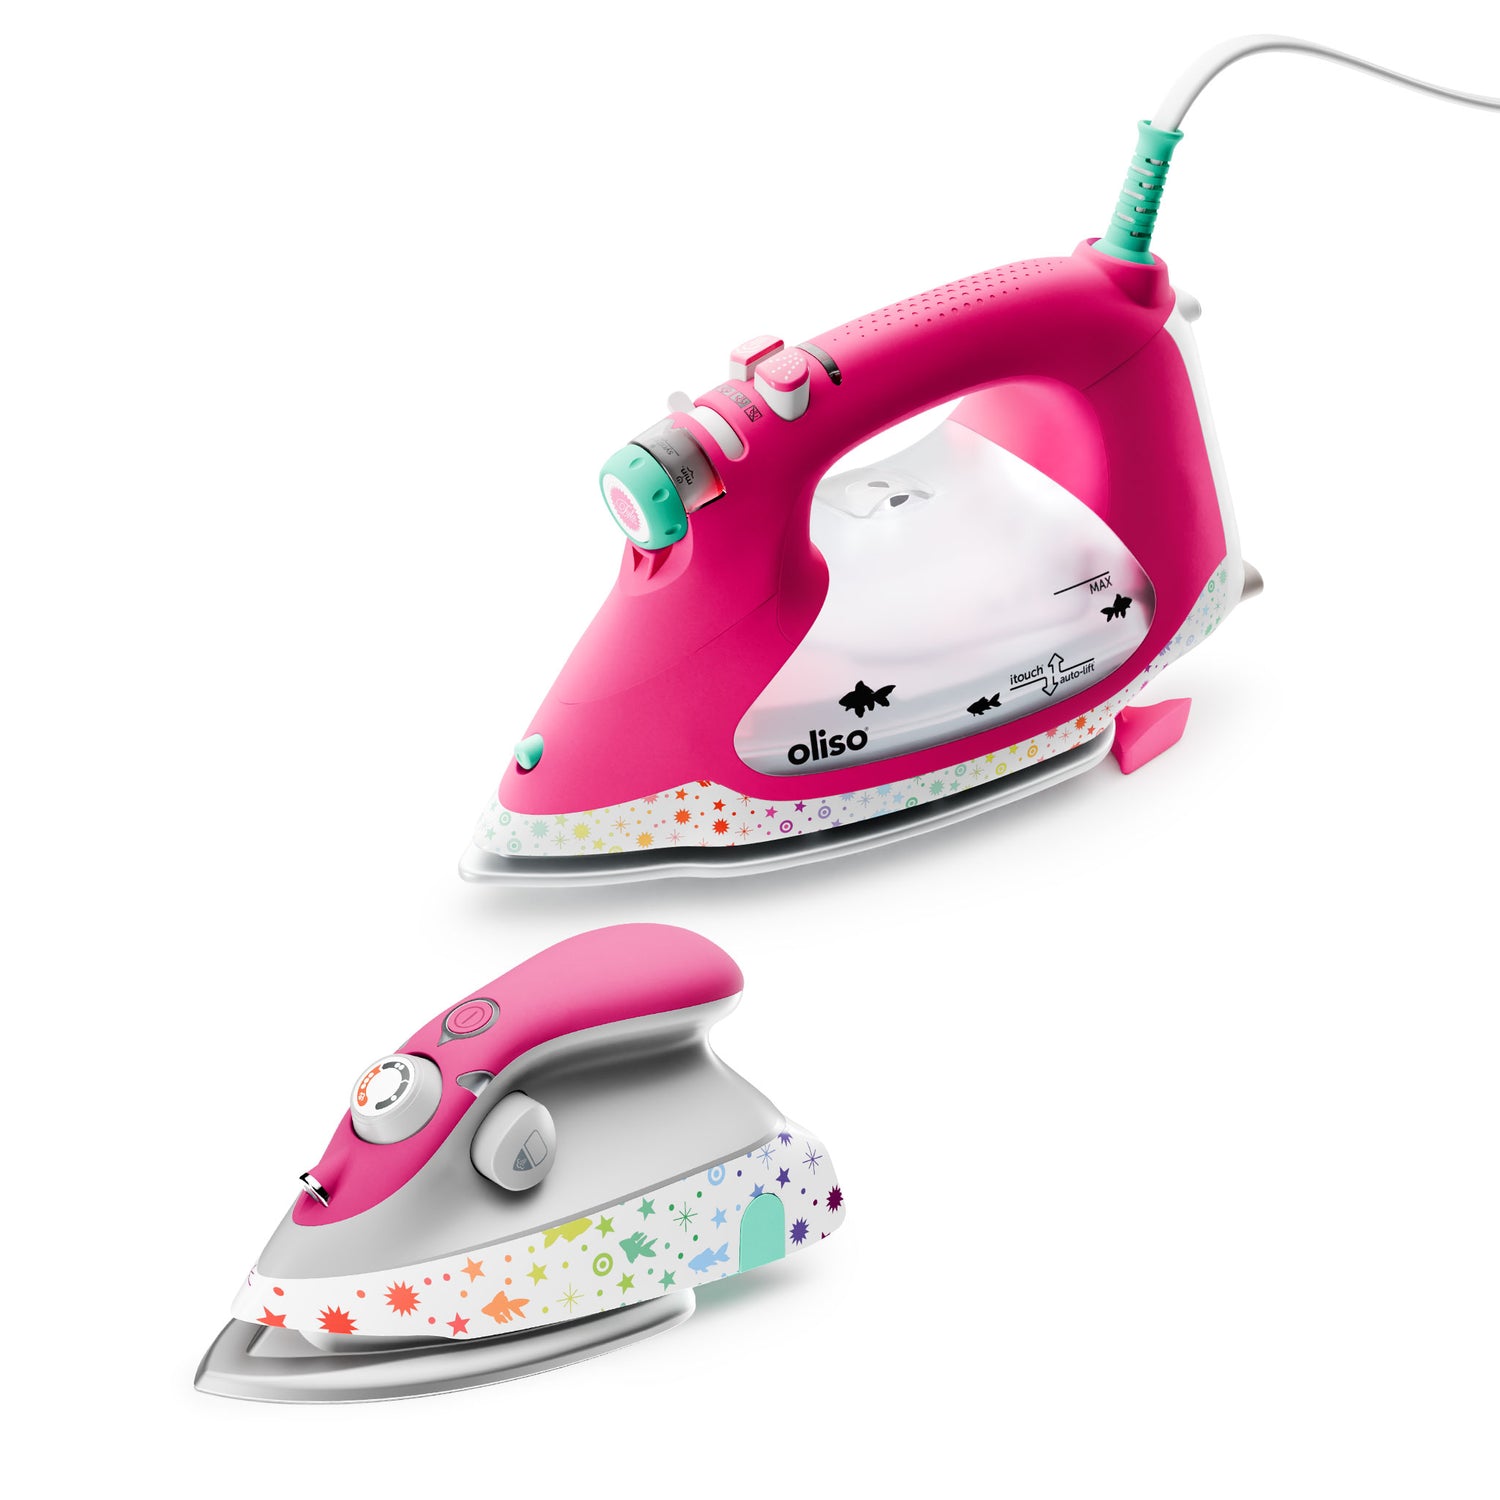 Oliso - Pink Iron TG1600 Pro Plus - Quilting Notions